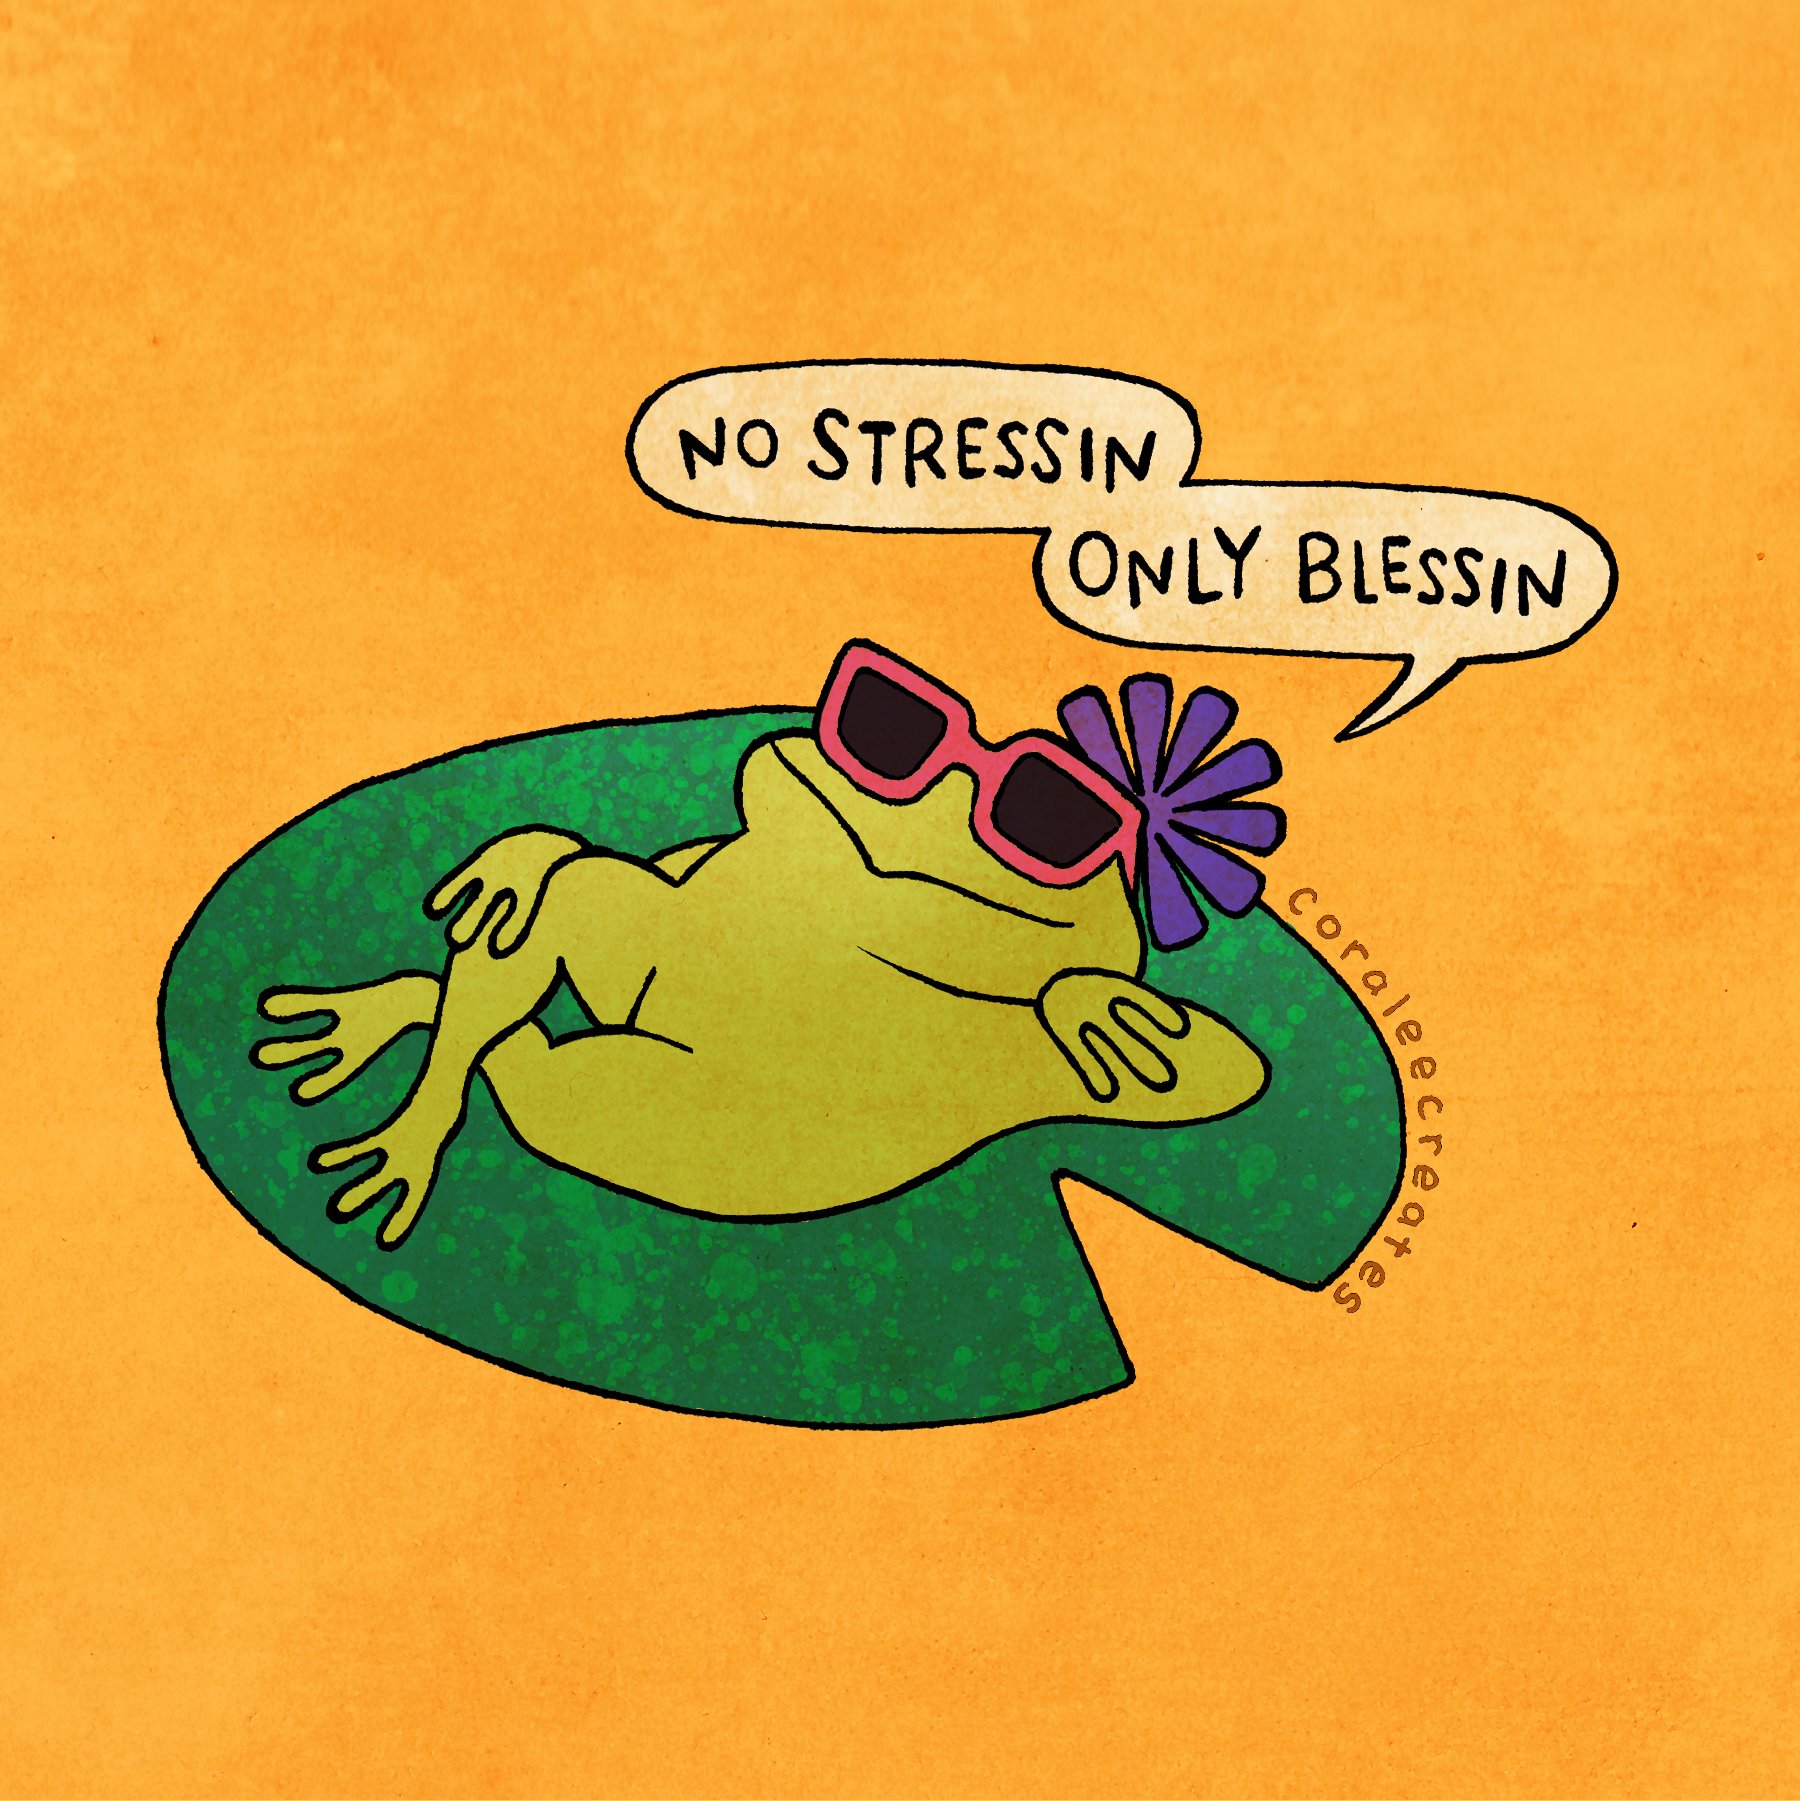 no_stressin_only_blessin.jpg